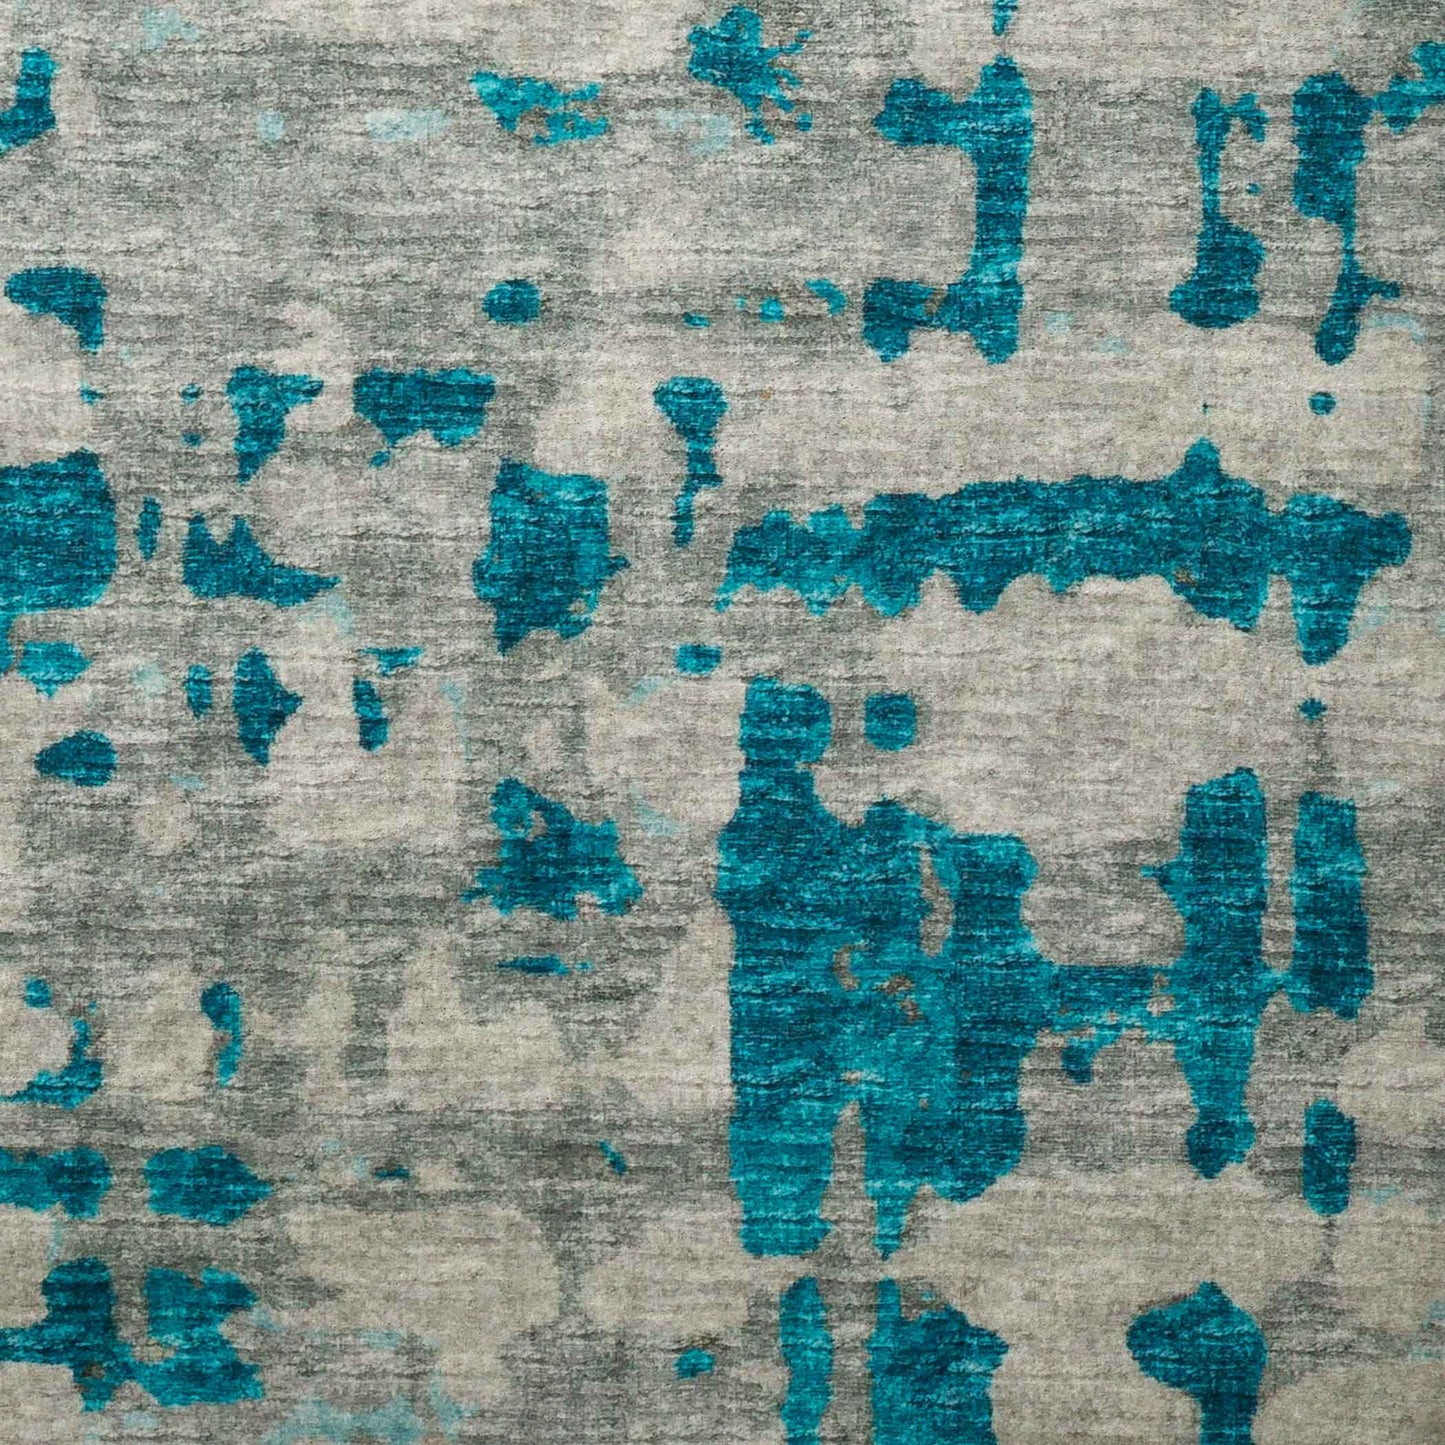 Dalyn Rugs Brisbane BR5 Teal  Contemporary Machinemade Rug